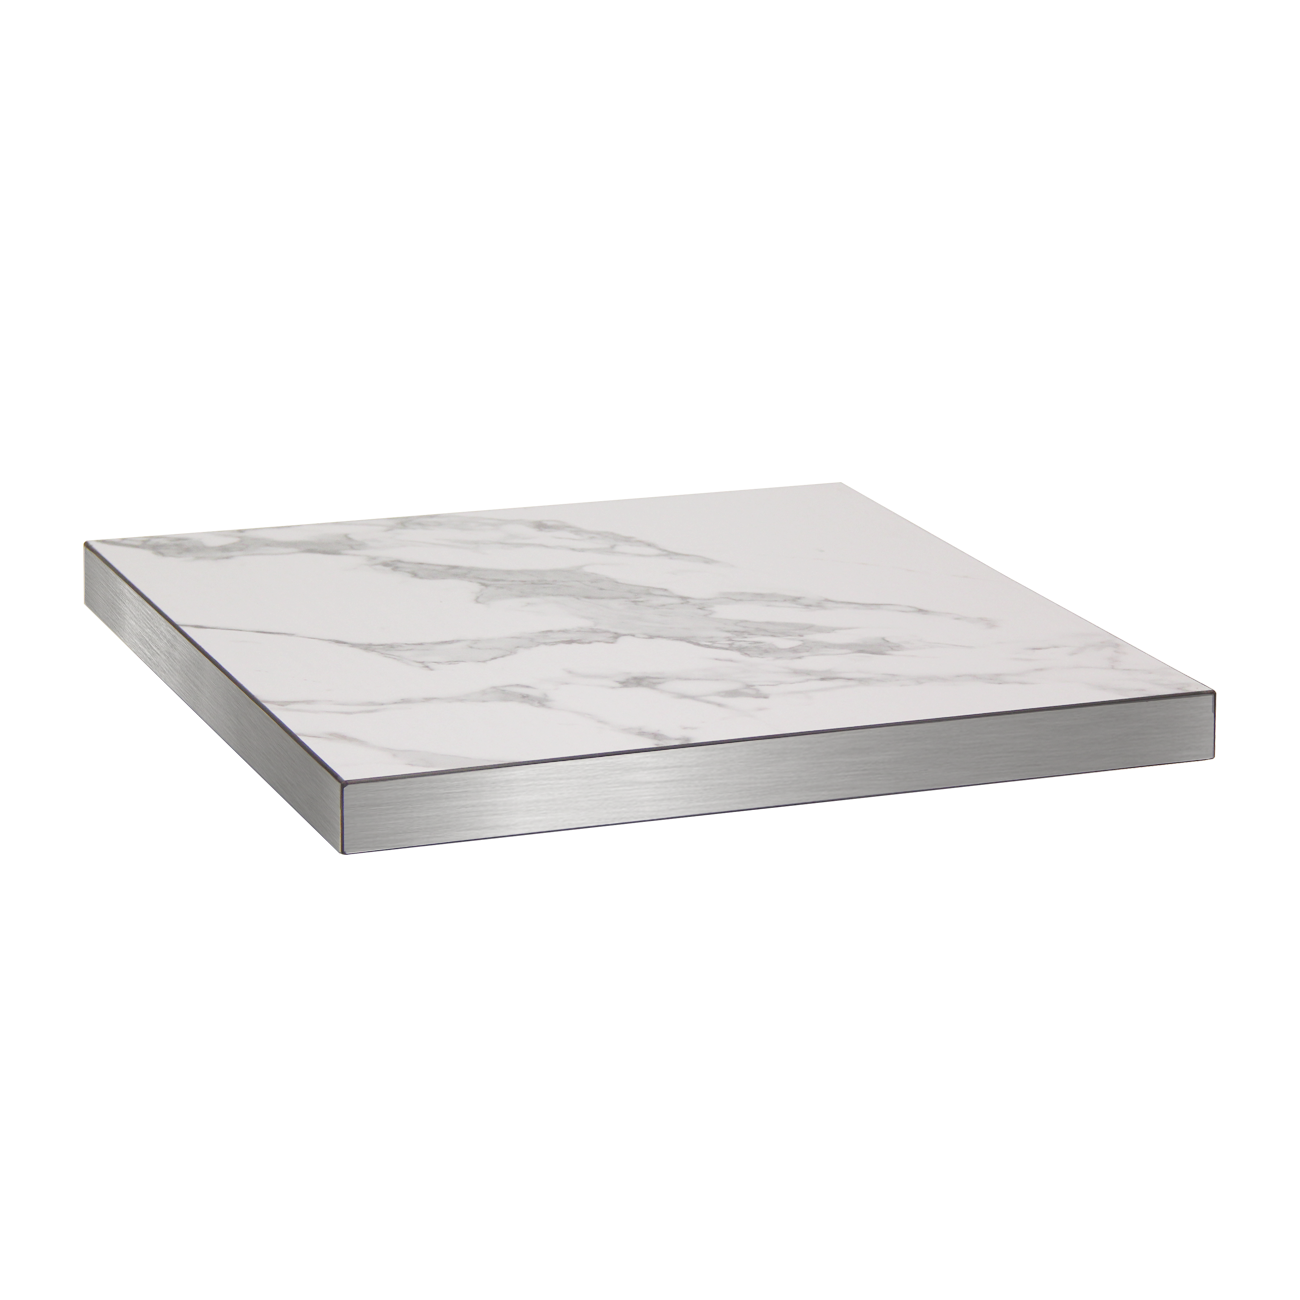 24 x 30 Melamine Table Top in White Finish, 2 Thick : Restaurant